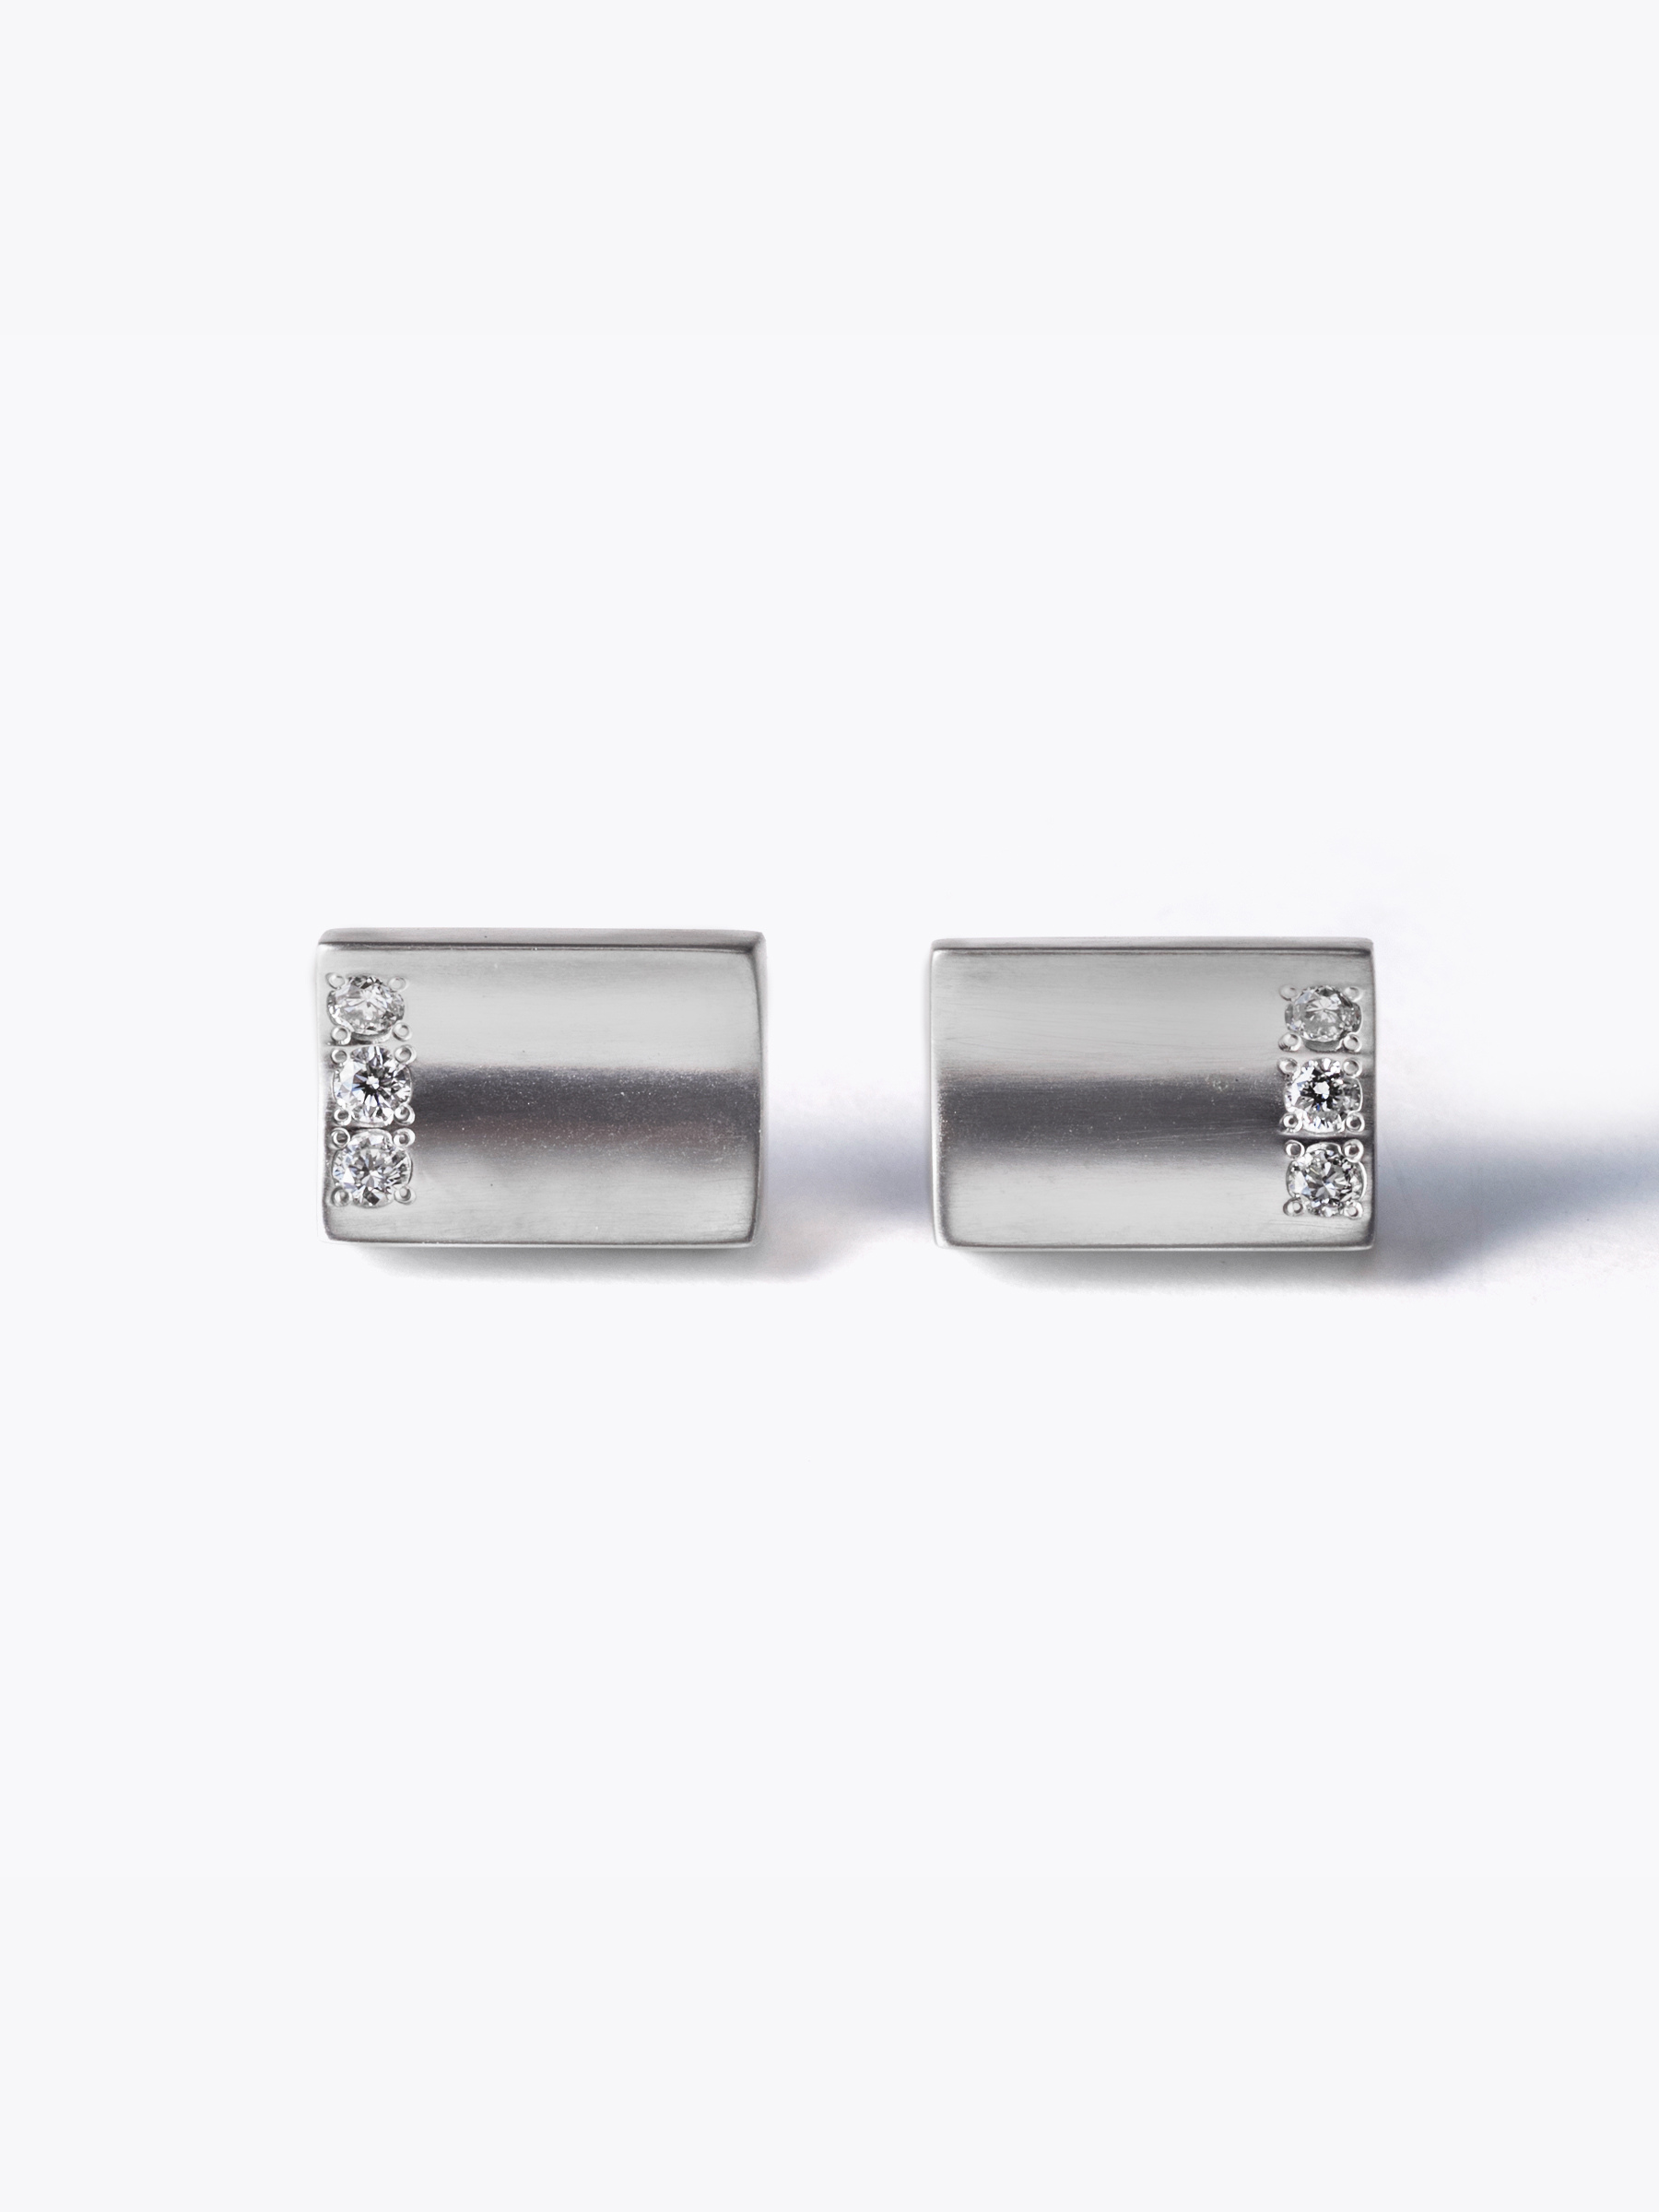 [Successeure] Reshine scratch earrings 6 labgrowndiamonds (Pair) Quick Delivery